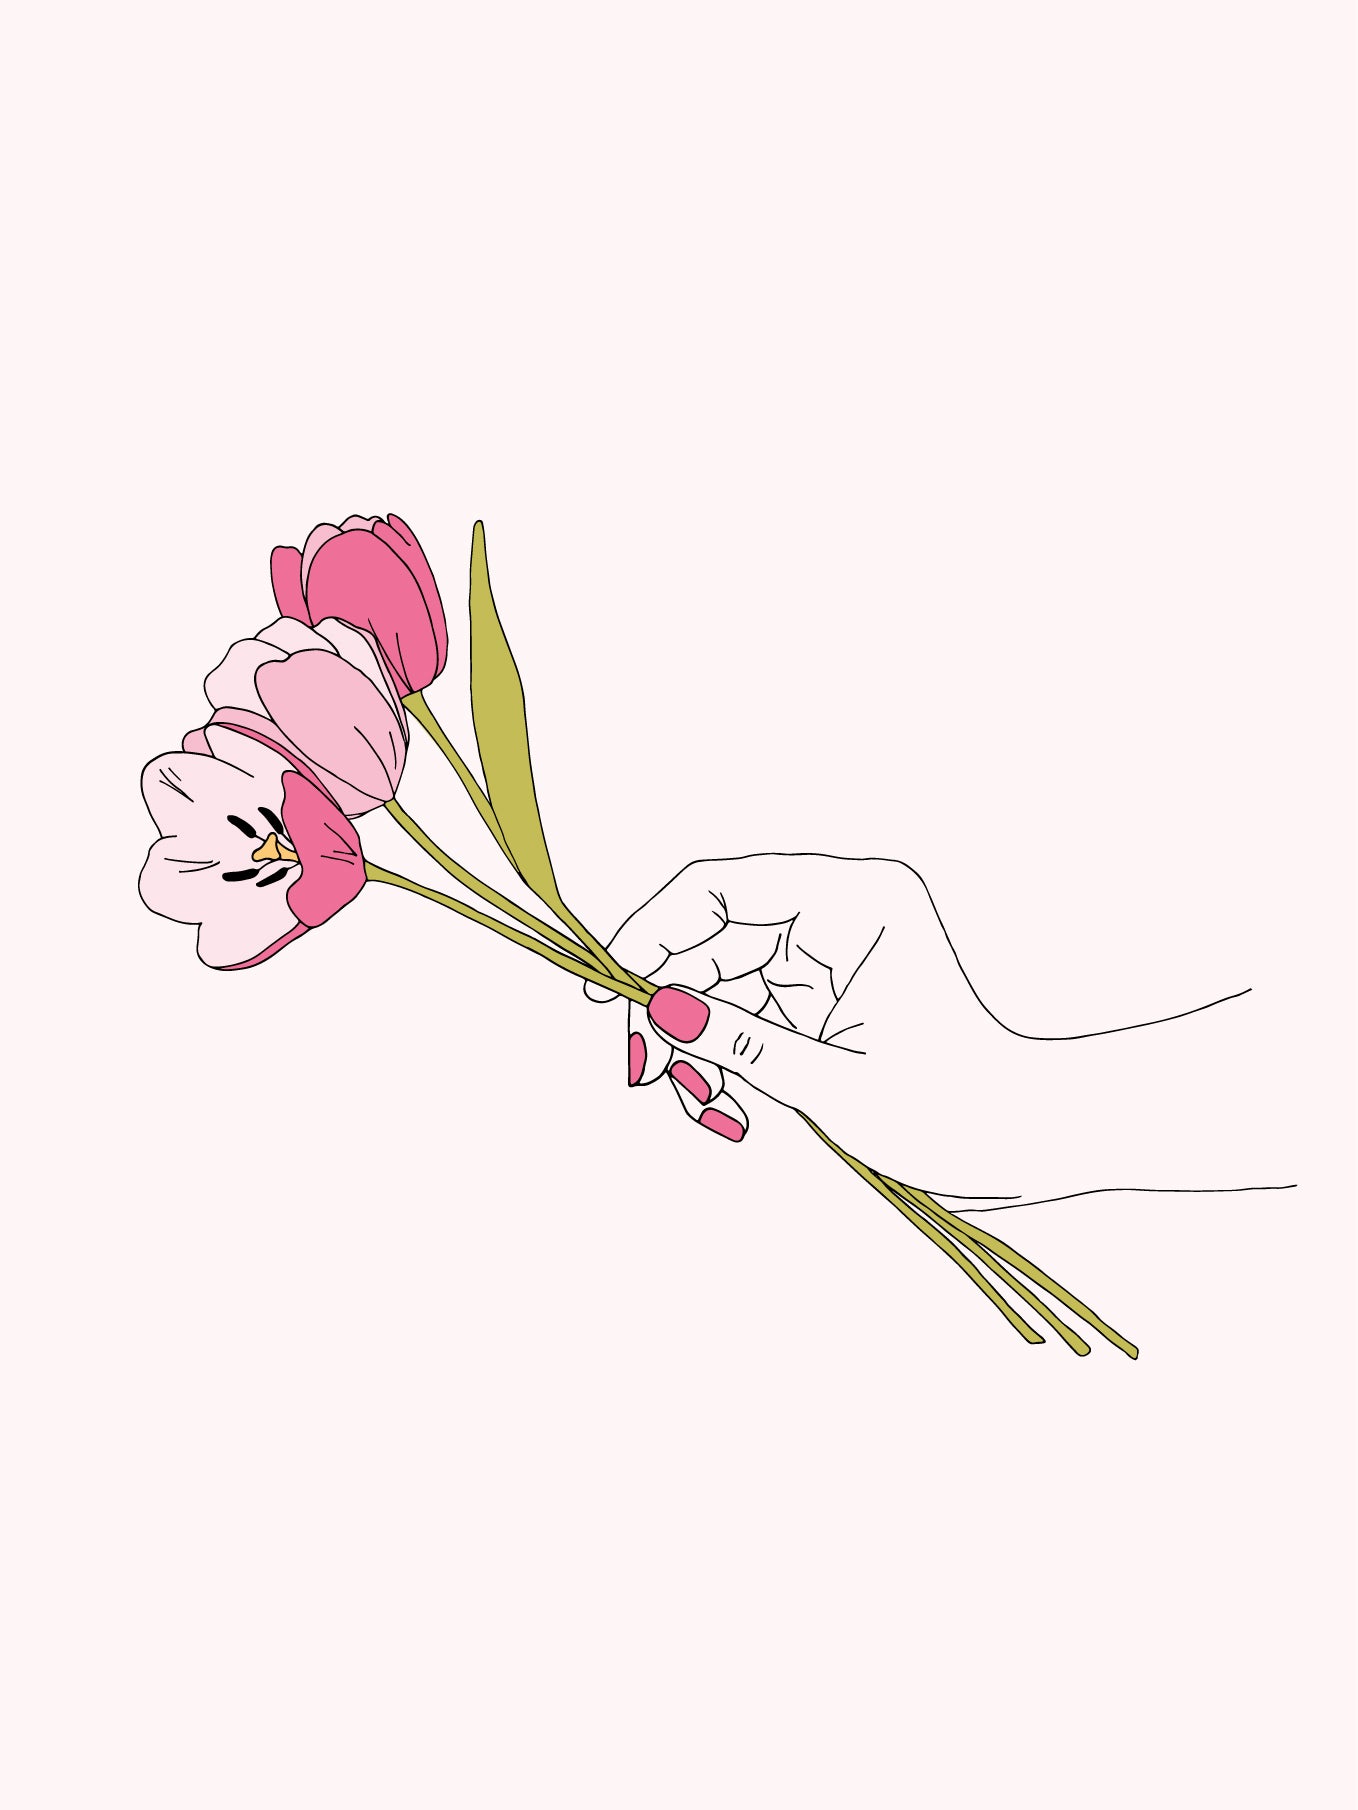 Hand holding flowers wallpaper - free download for desktop, iPad and iPhone